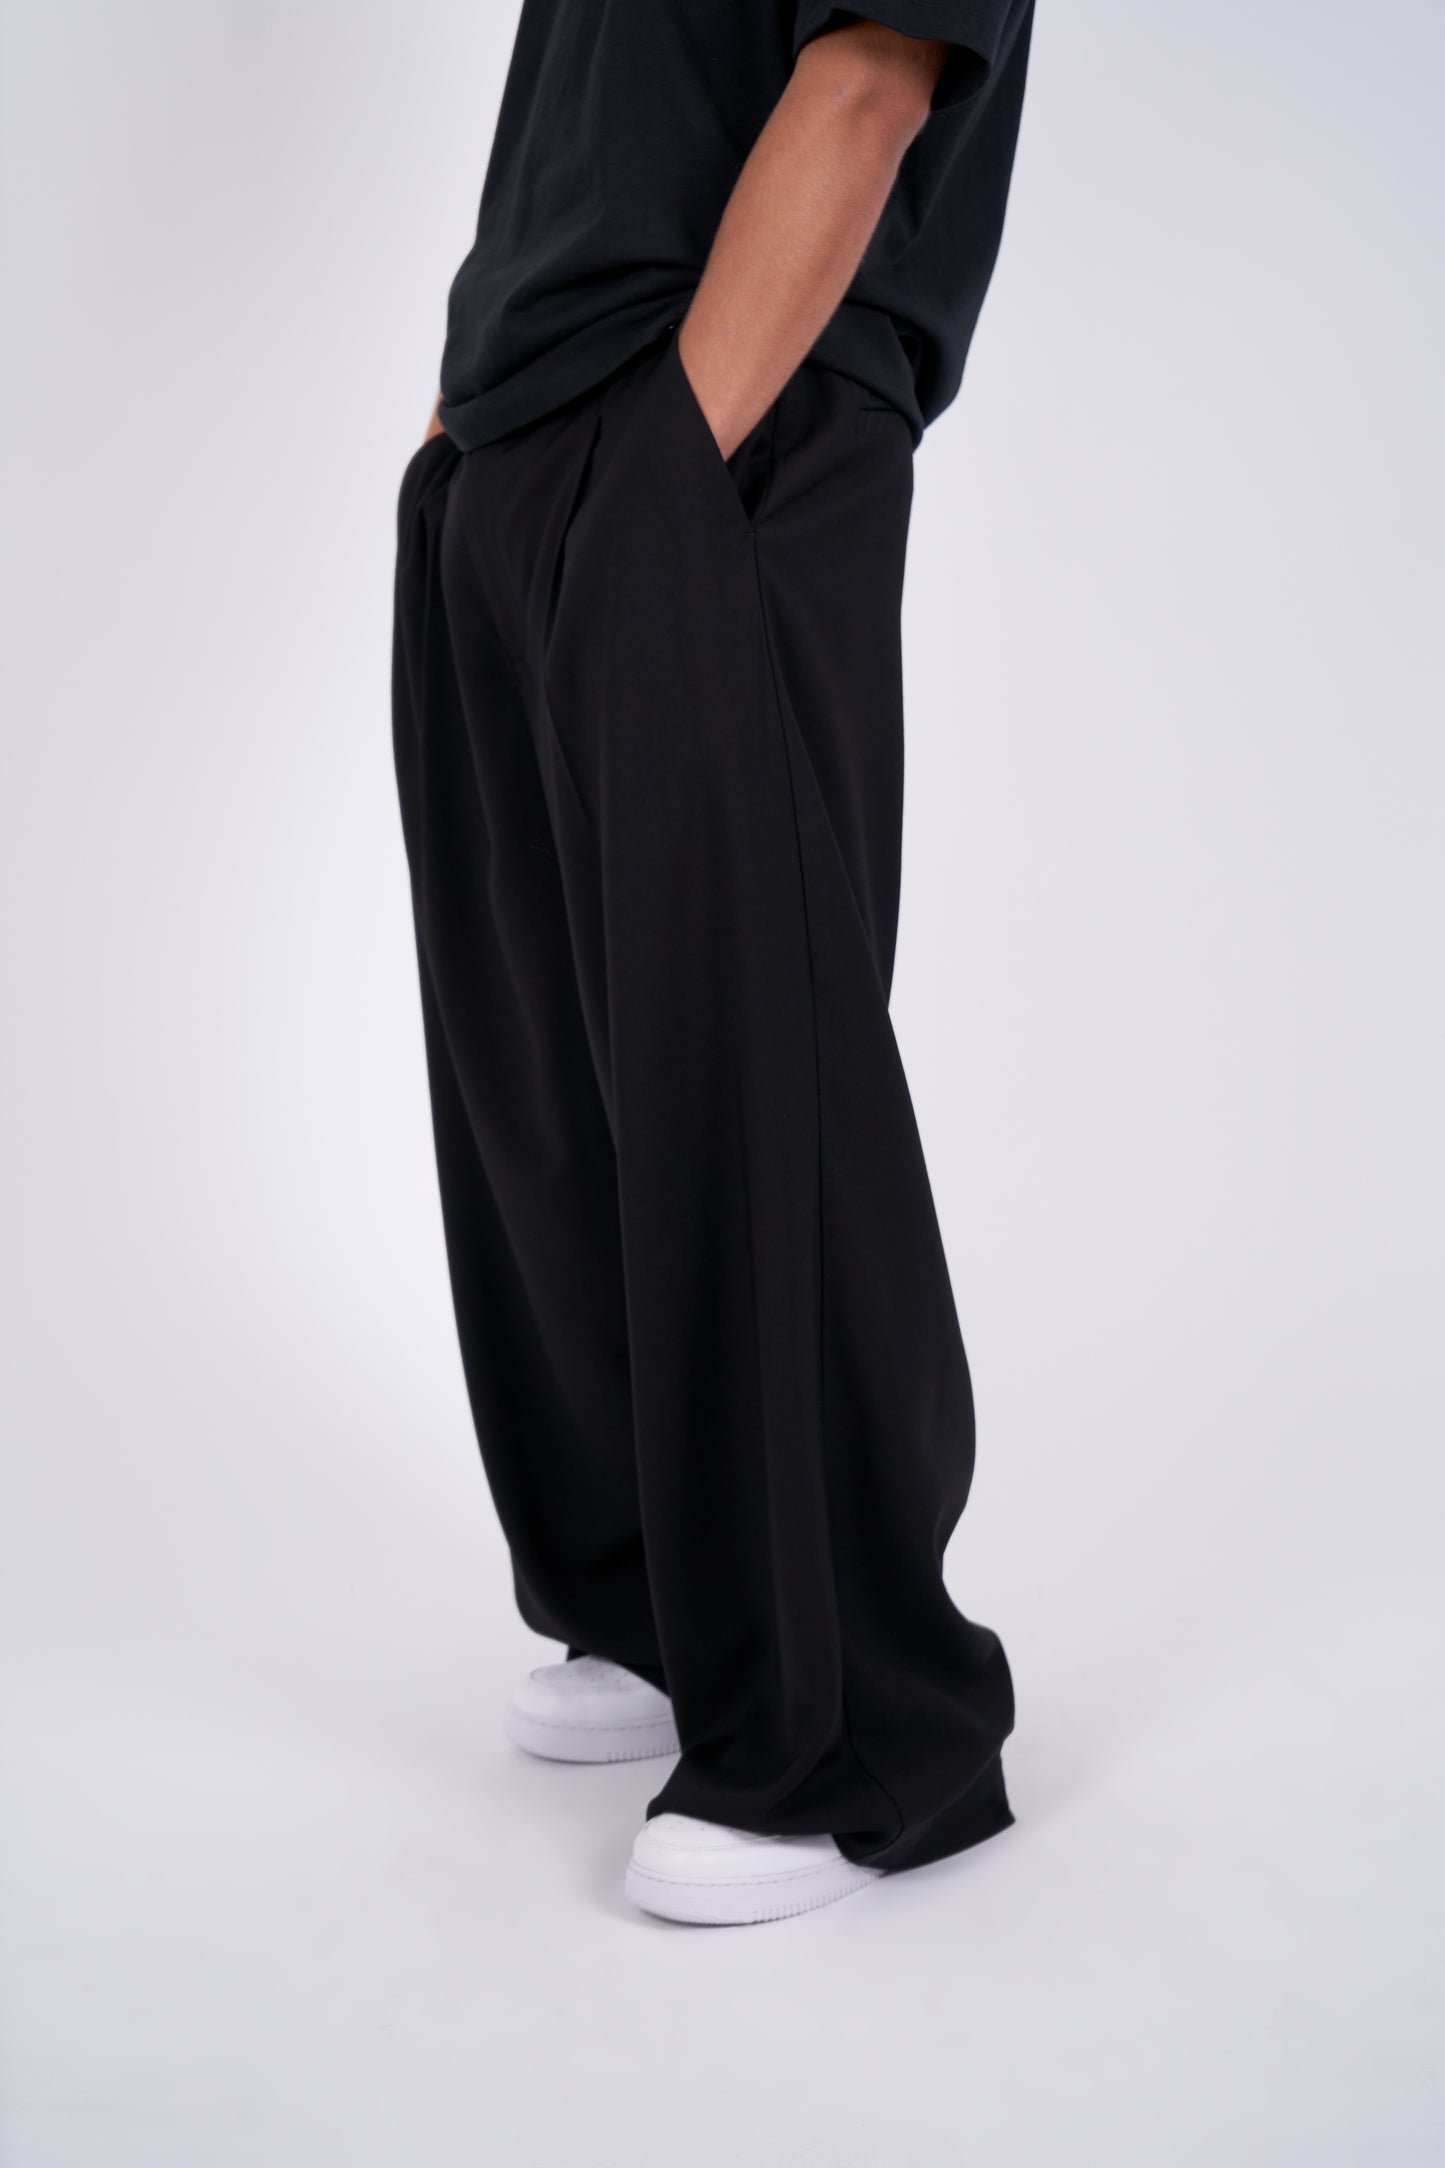 Black Wide Leg Pleated Trouser - Due Diligence Apparel